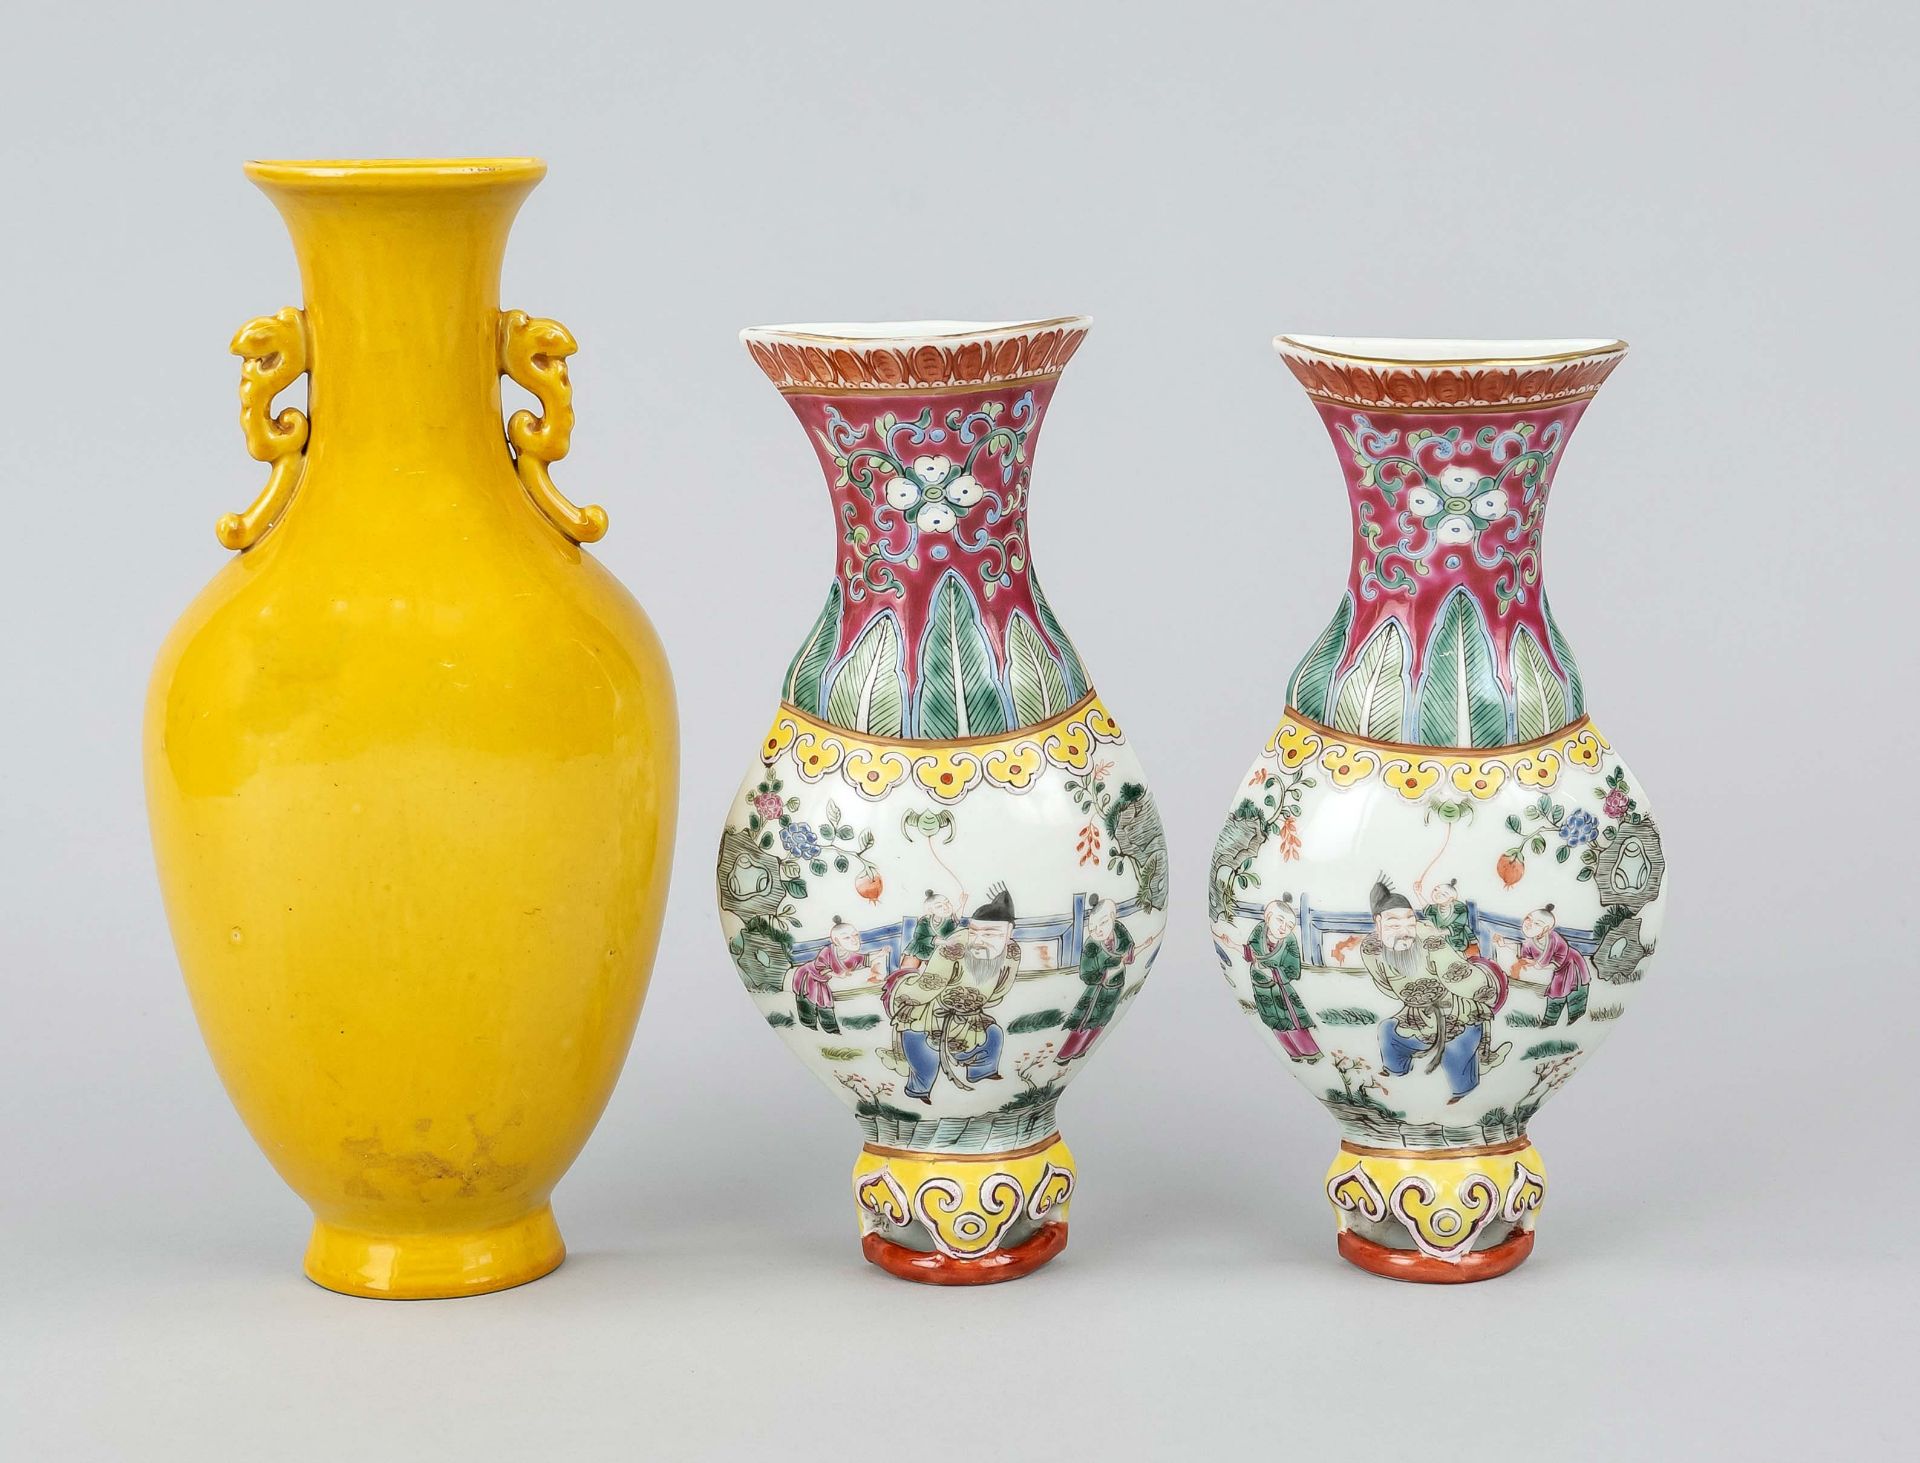 3 wall vases, China, Qing dynasty(1644-1912) 19th c. or later, porcelain, pair of congratulatory